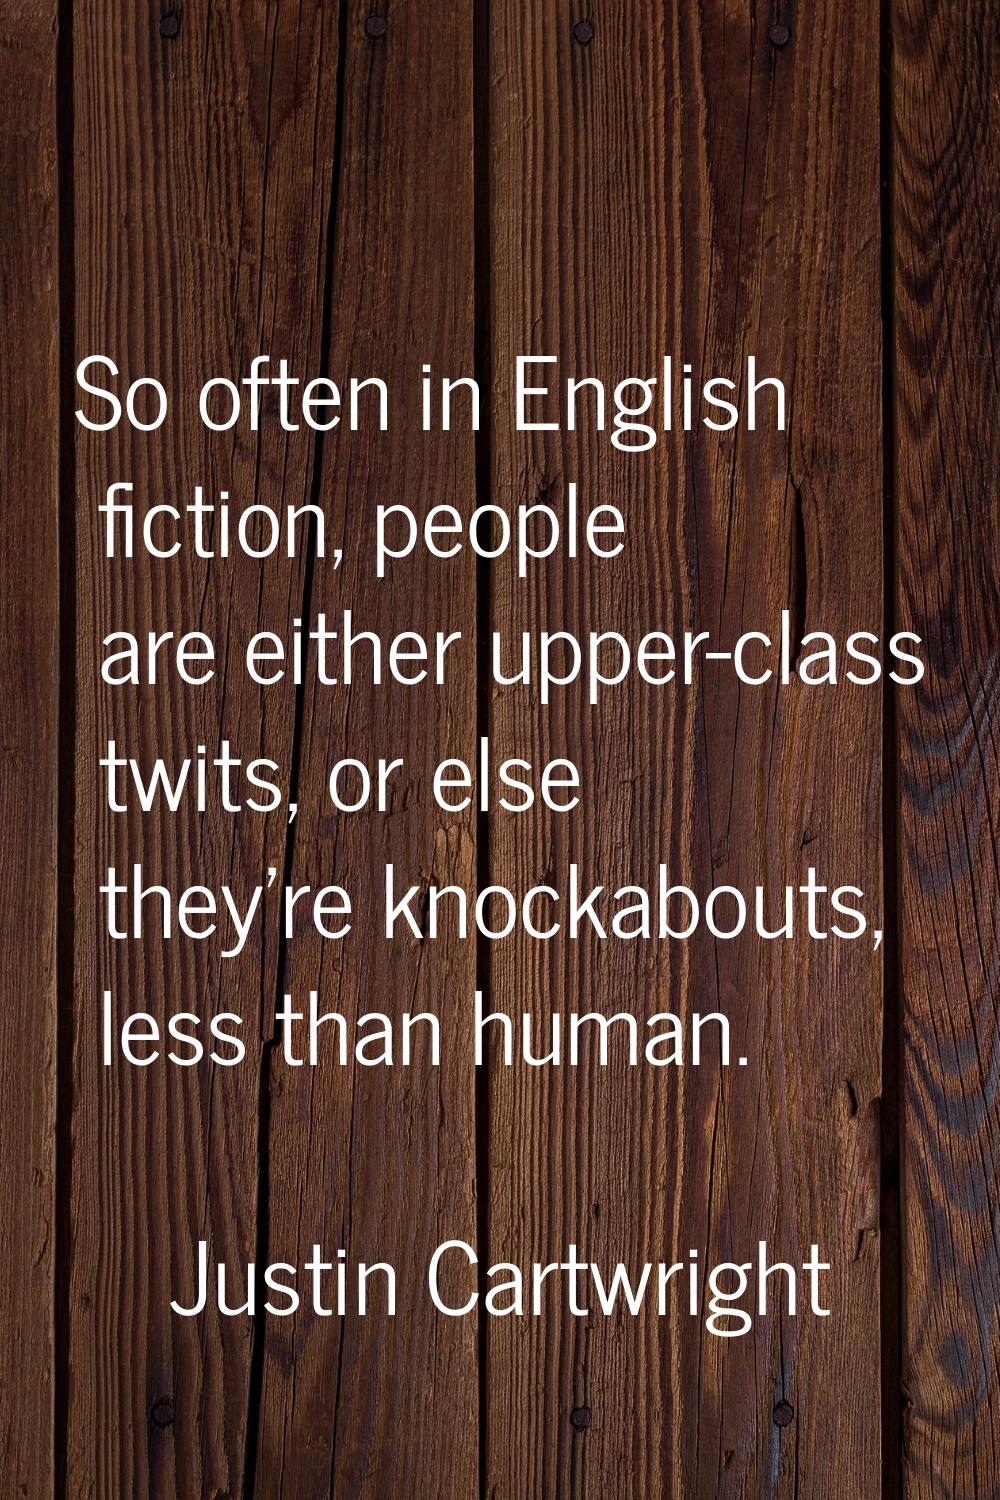 So often in English fiction, people are either upper-class twits, or else they're knockabouts, less